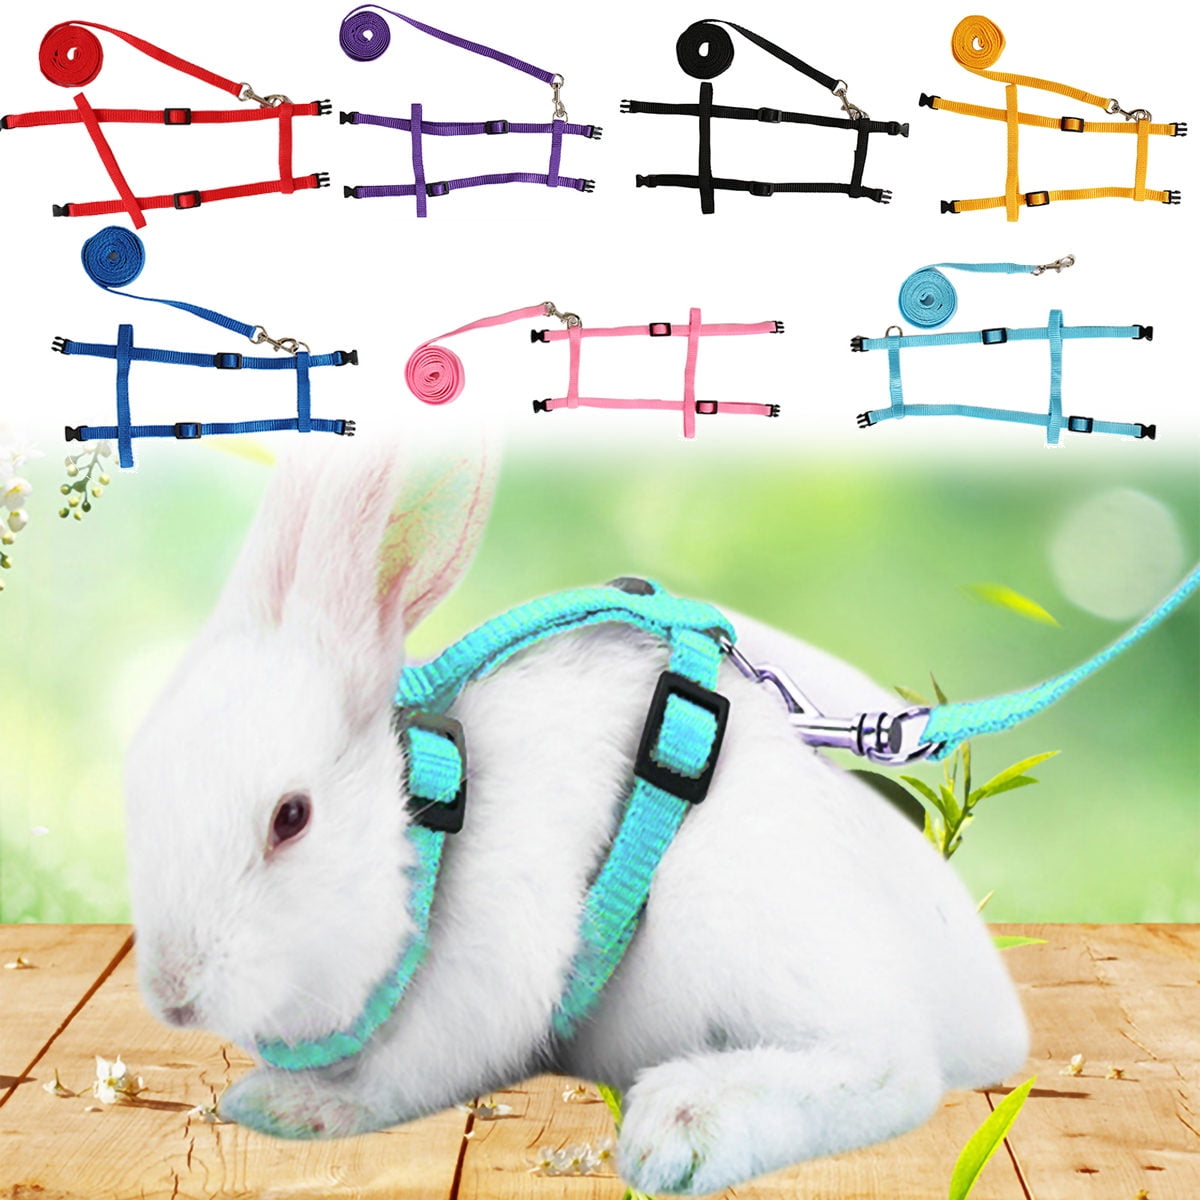 Small Pets 4 Sets Adjustable Bunny Rabbit Harness and Leash Set Small Pet Cute Vest Harness Leash Ferret Harness Guinea Pig Harness Ferret Leash with Decorations for Bunny Kitten Puppy 